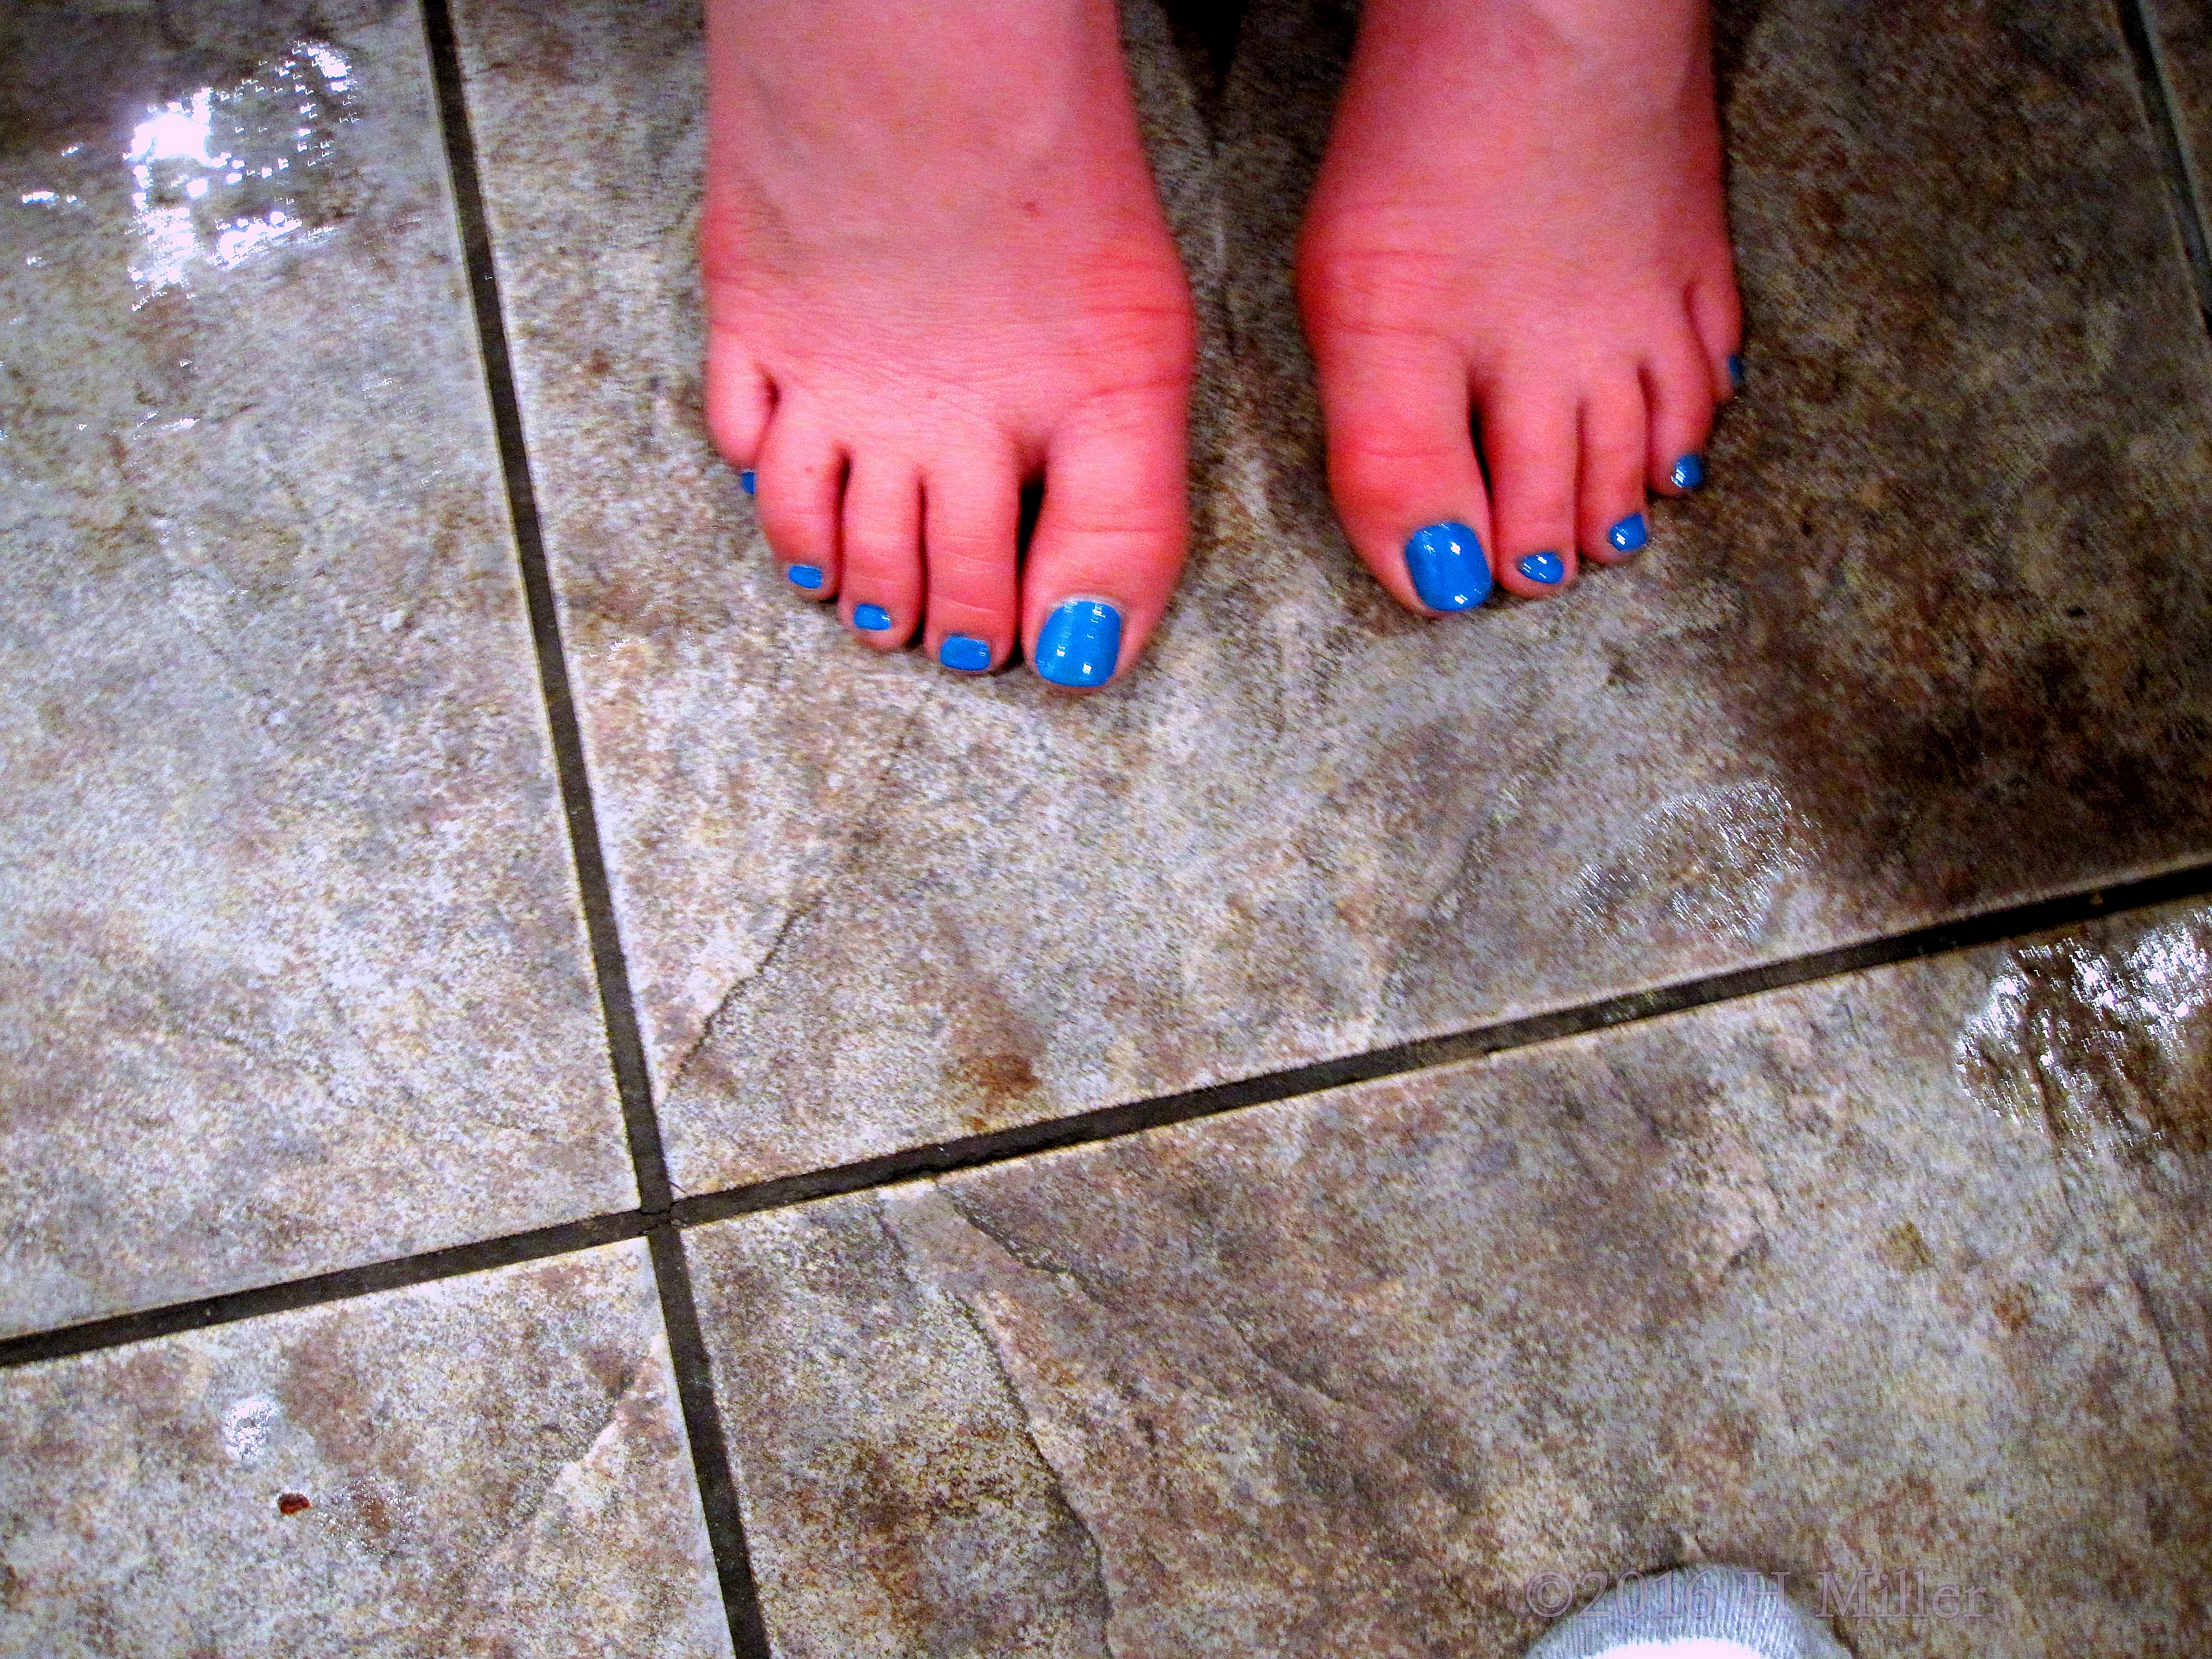 Matte Blue Nail Color For This Kids Pedi Looks Amazing! 